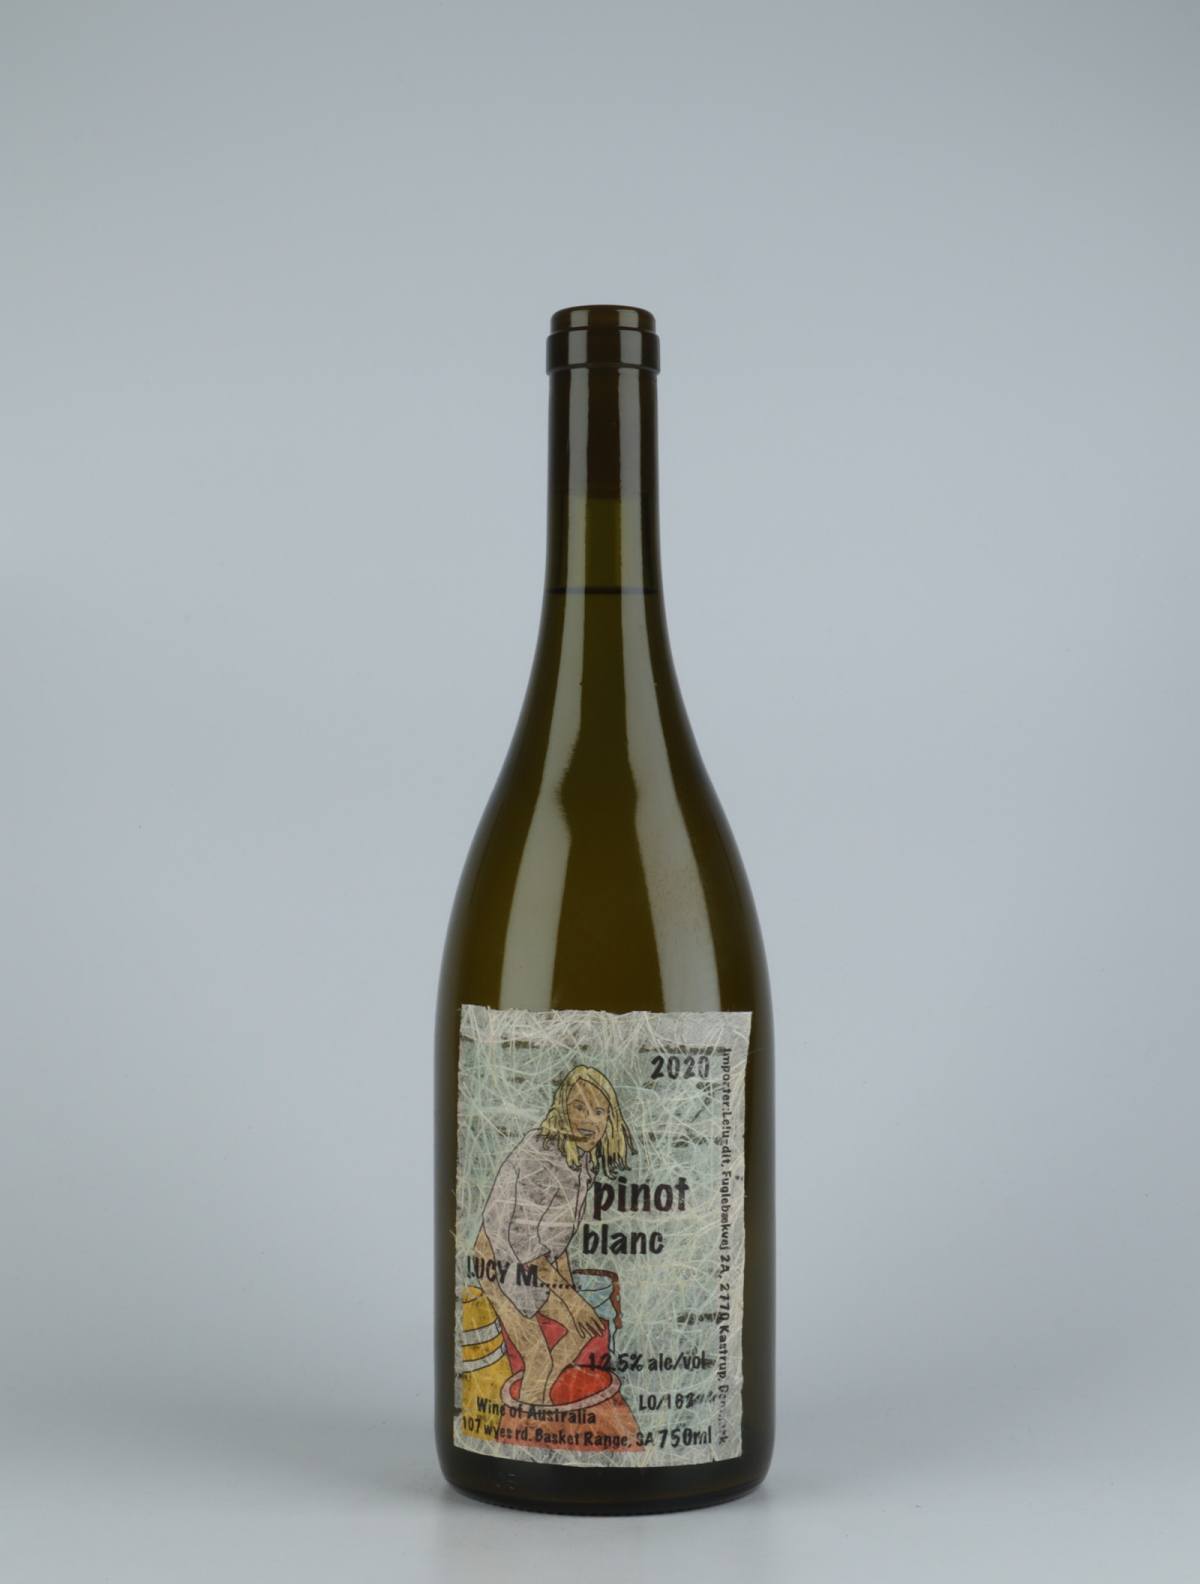 A bottle 2020 Pinot Blanc White wine from Lucy Margaux, Adelaide Hills in Australia